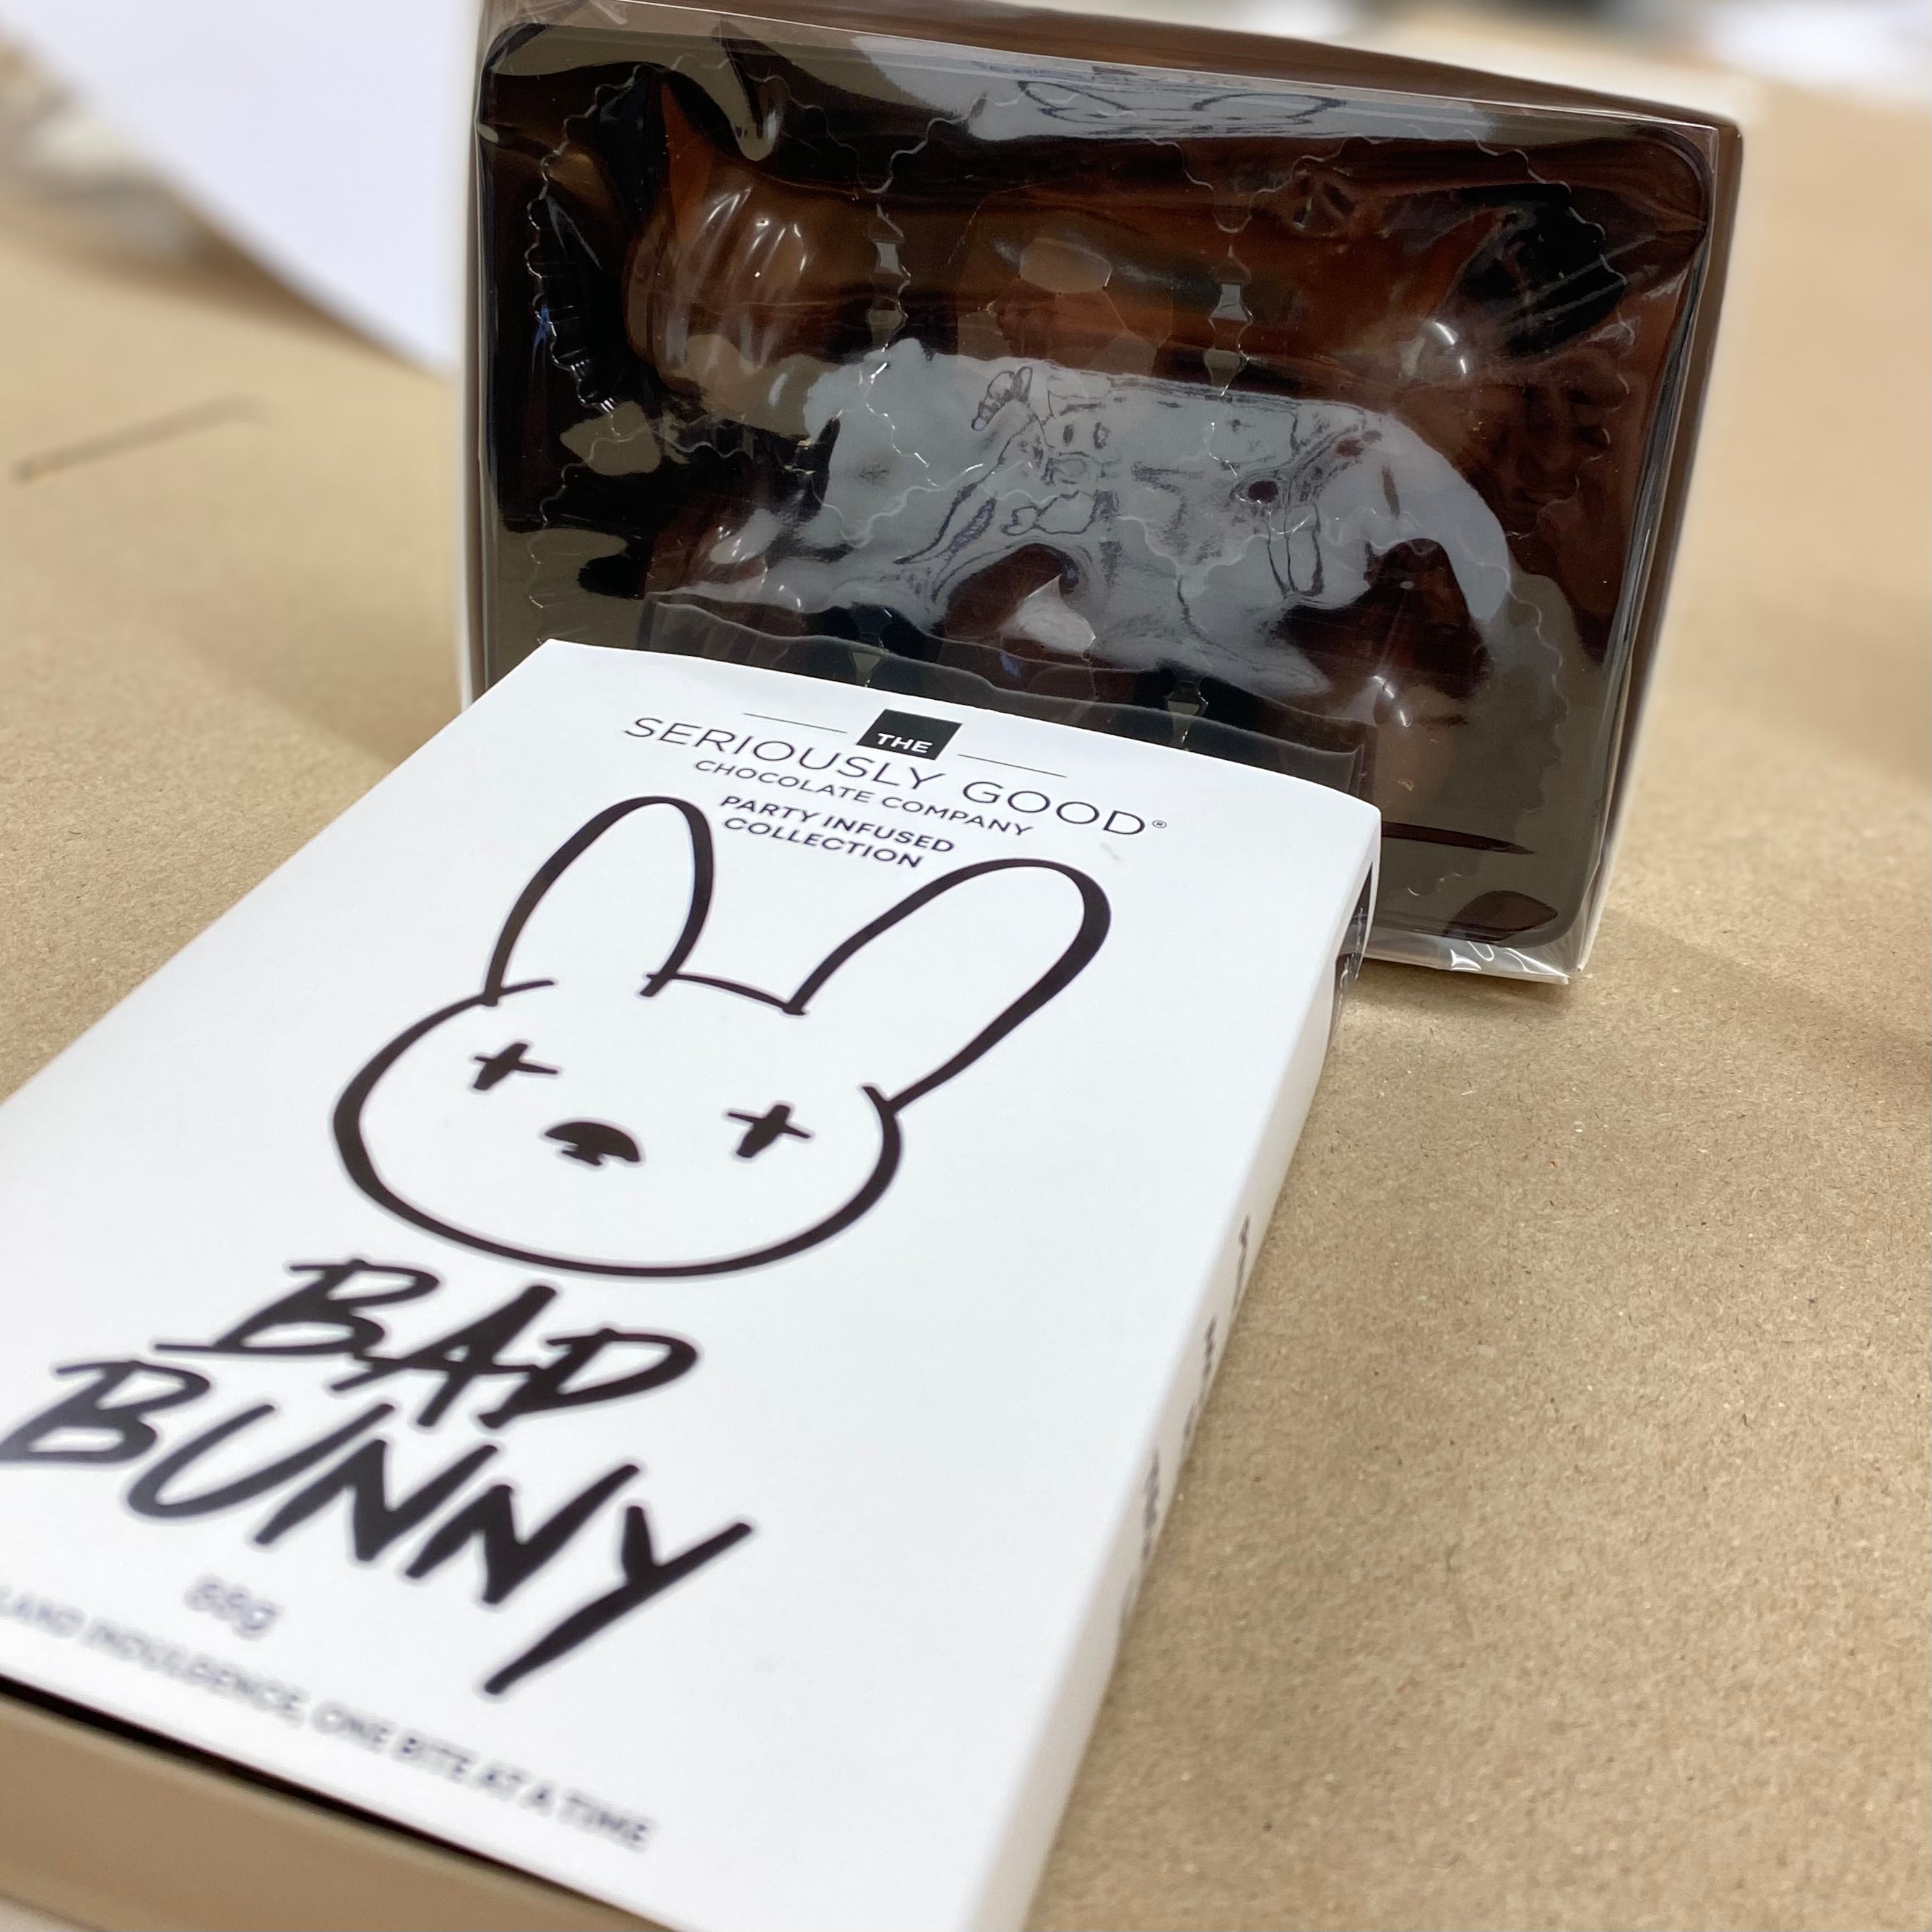 Bad Bunny - 6 Box Cocktail Collection